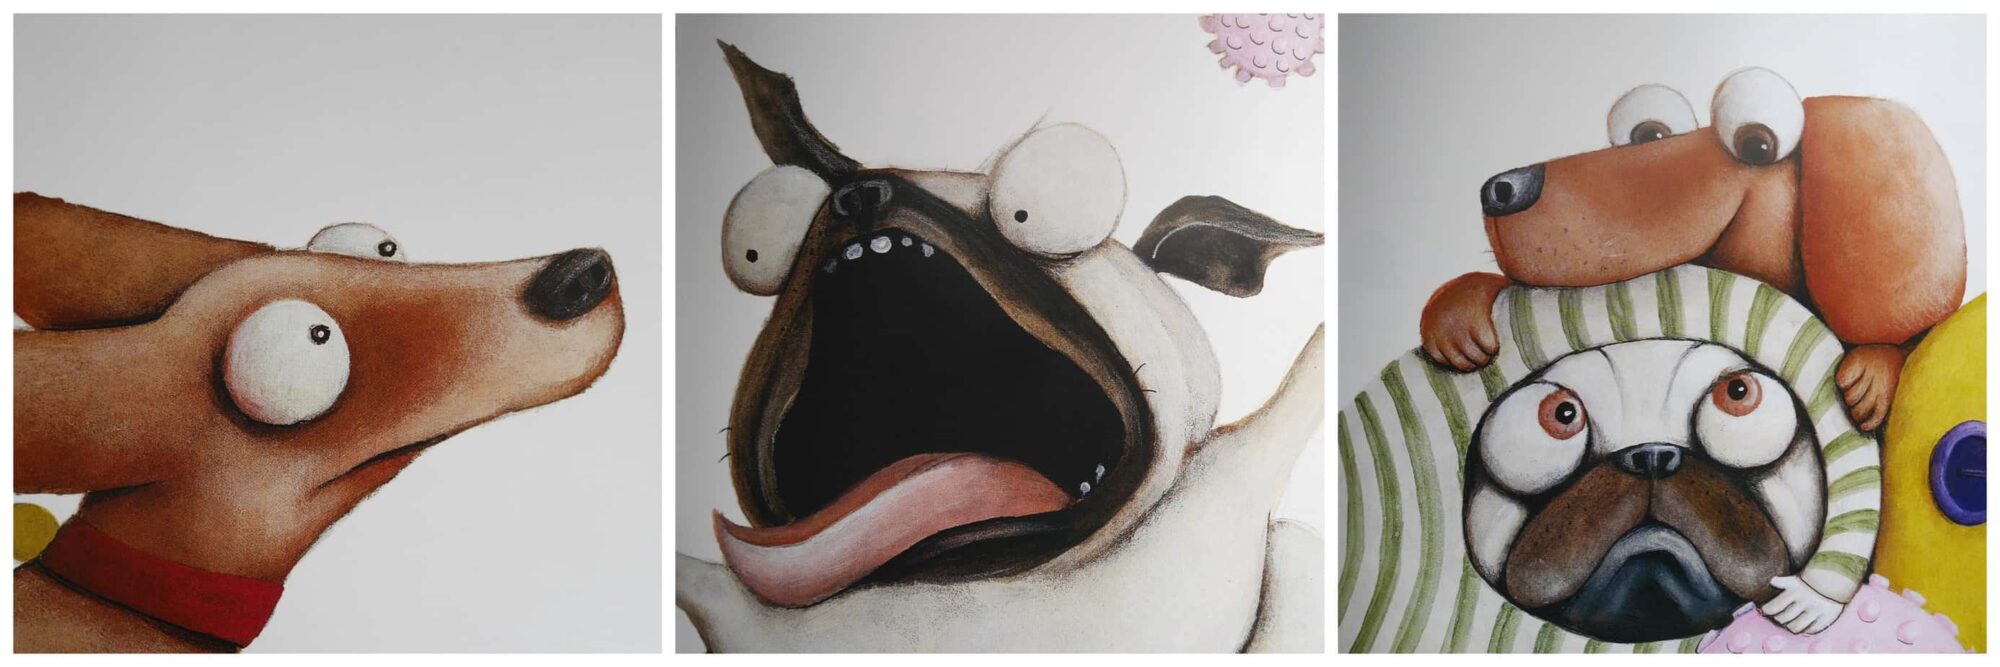 Pig The Pug by Aaron Blabey Picture Book Analysis | SLAP HAPPY LARRY